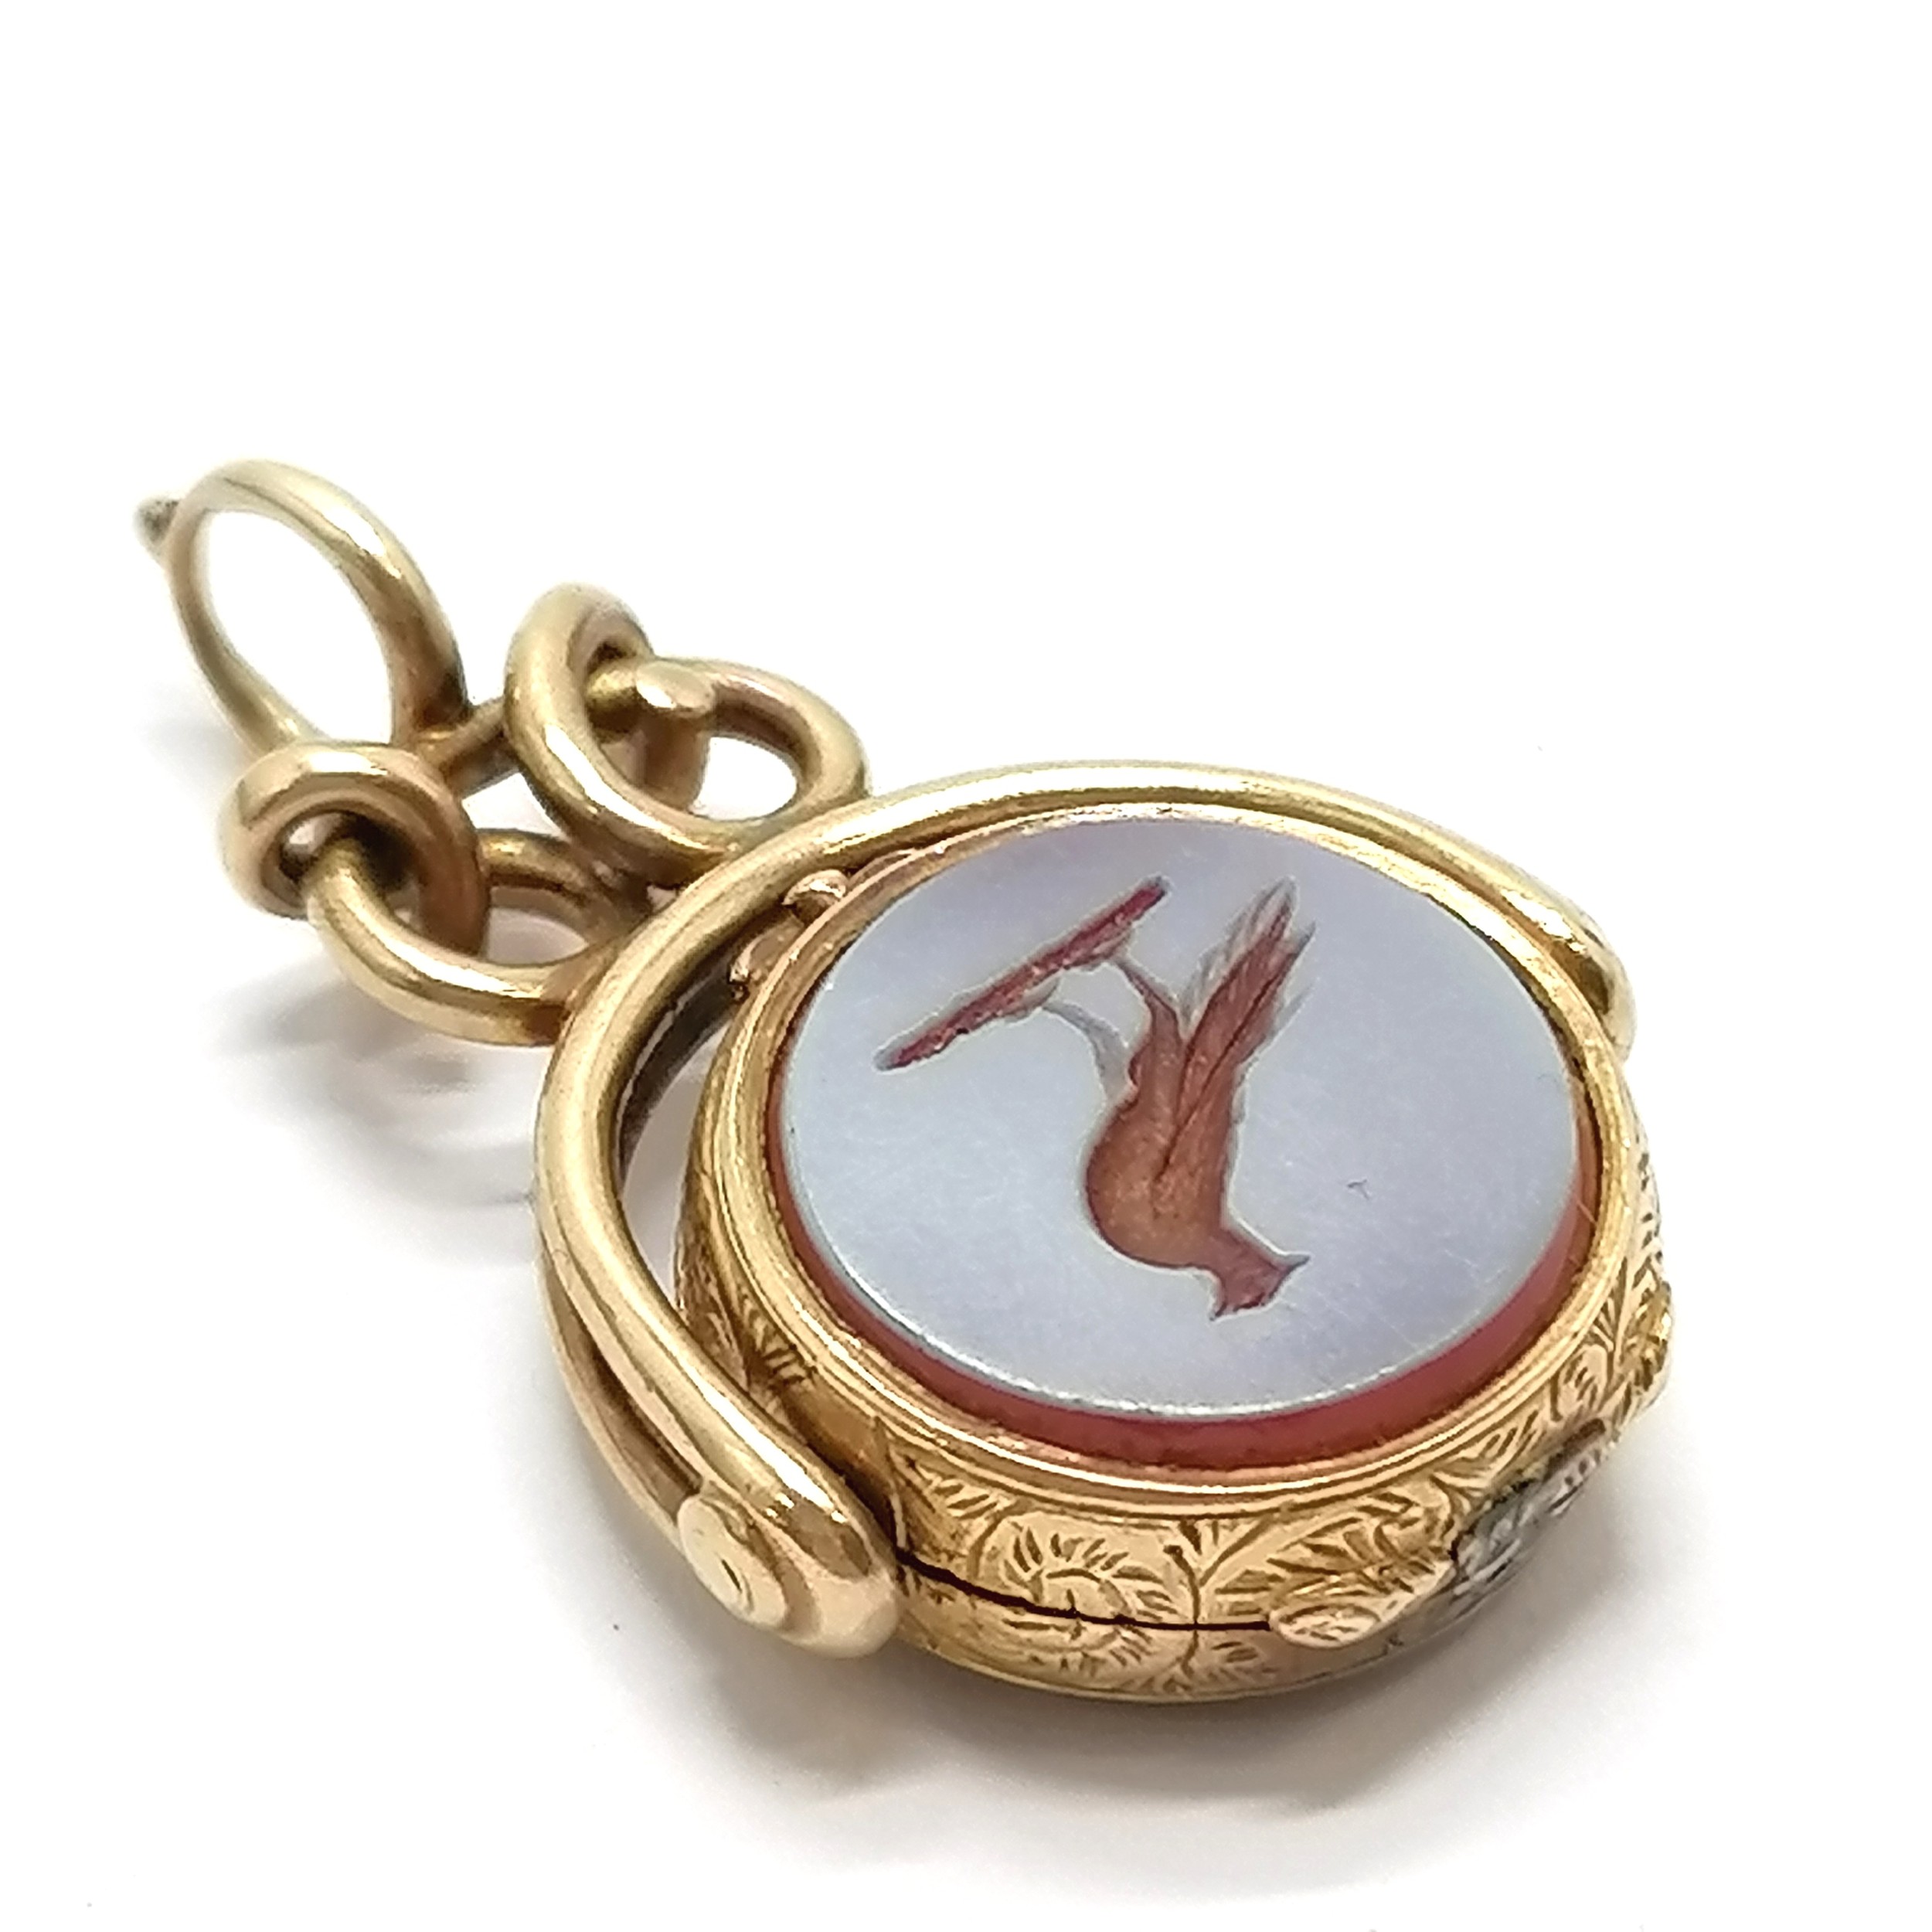 Unmarked antique gold (touch tests as higher carat) RARE swivel fob locket with sardonyx and - Image 4 of 5